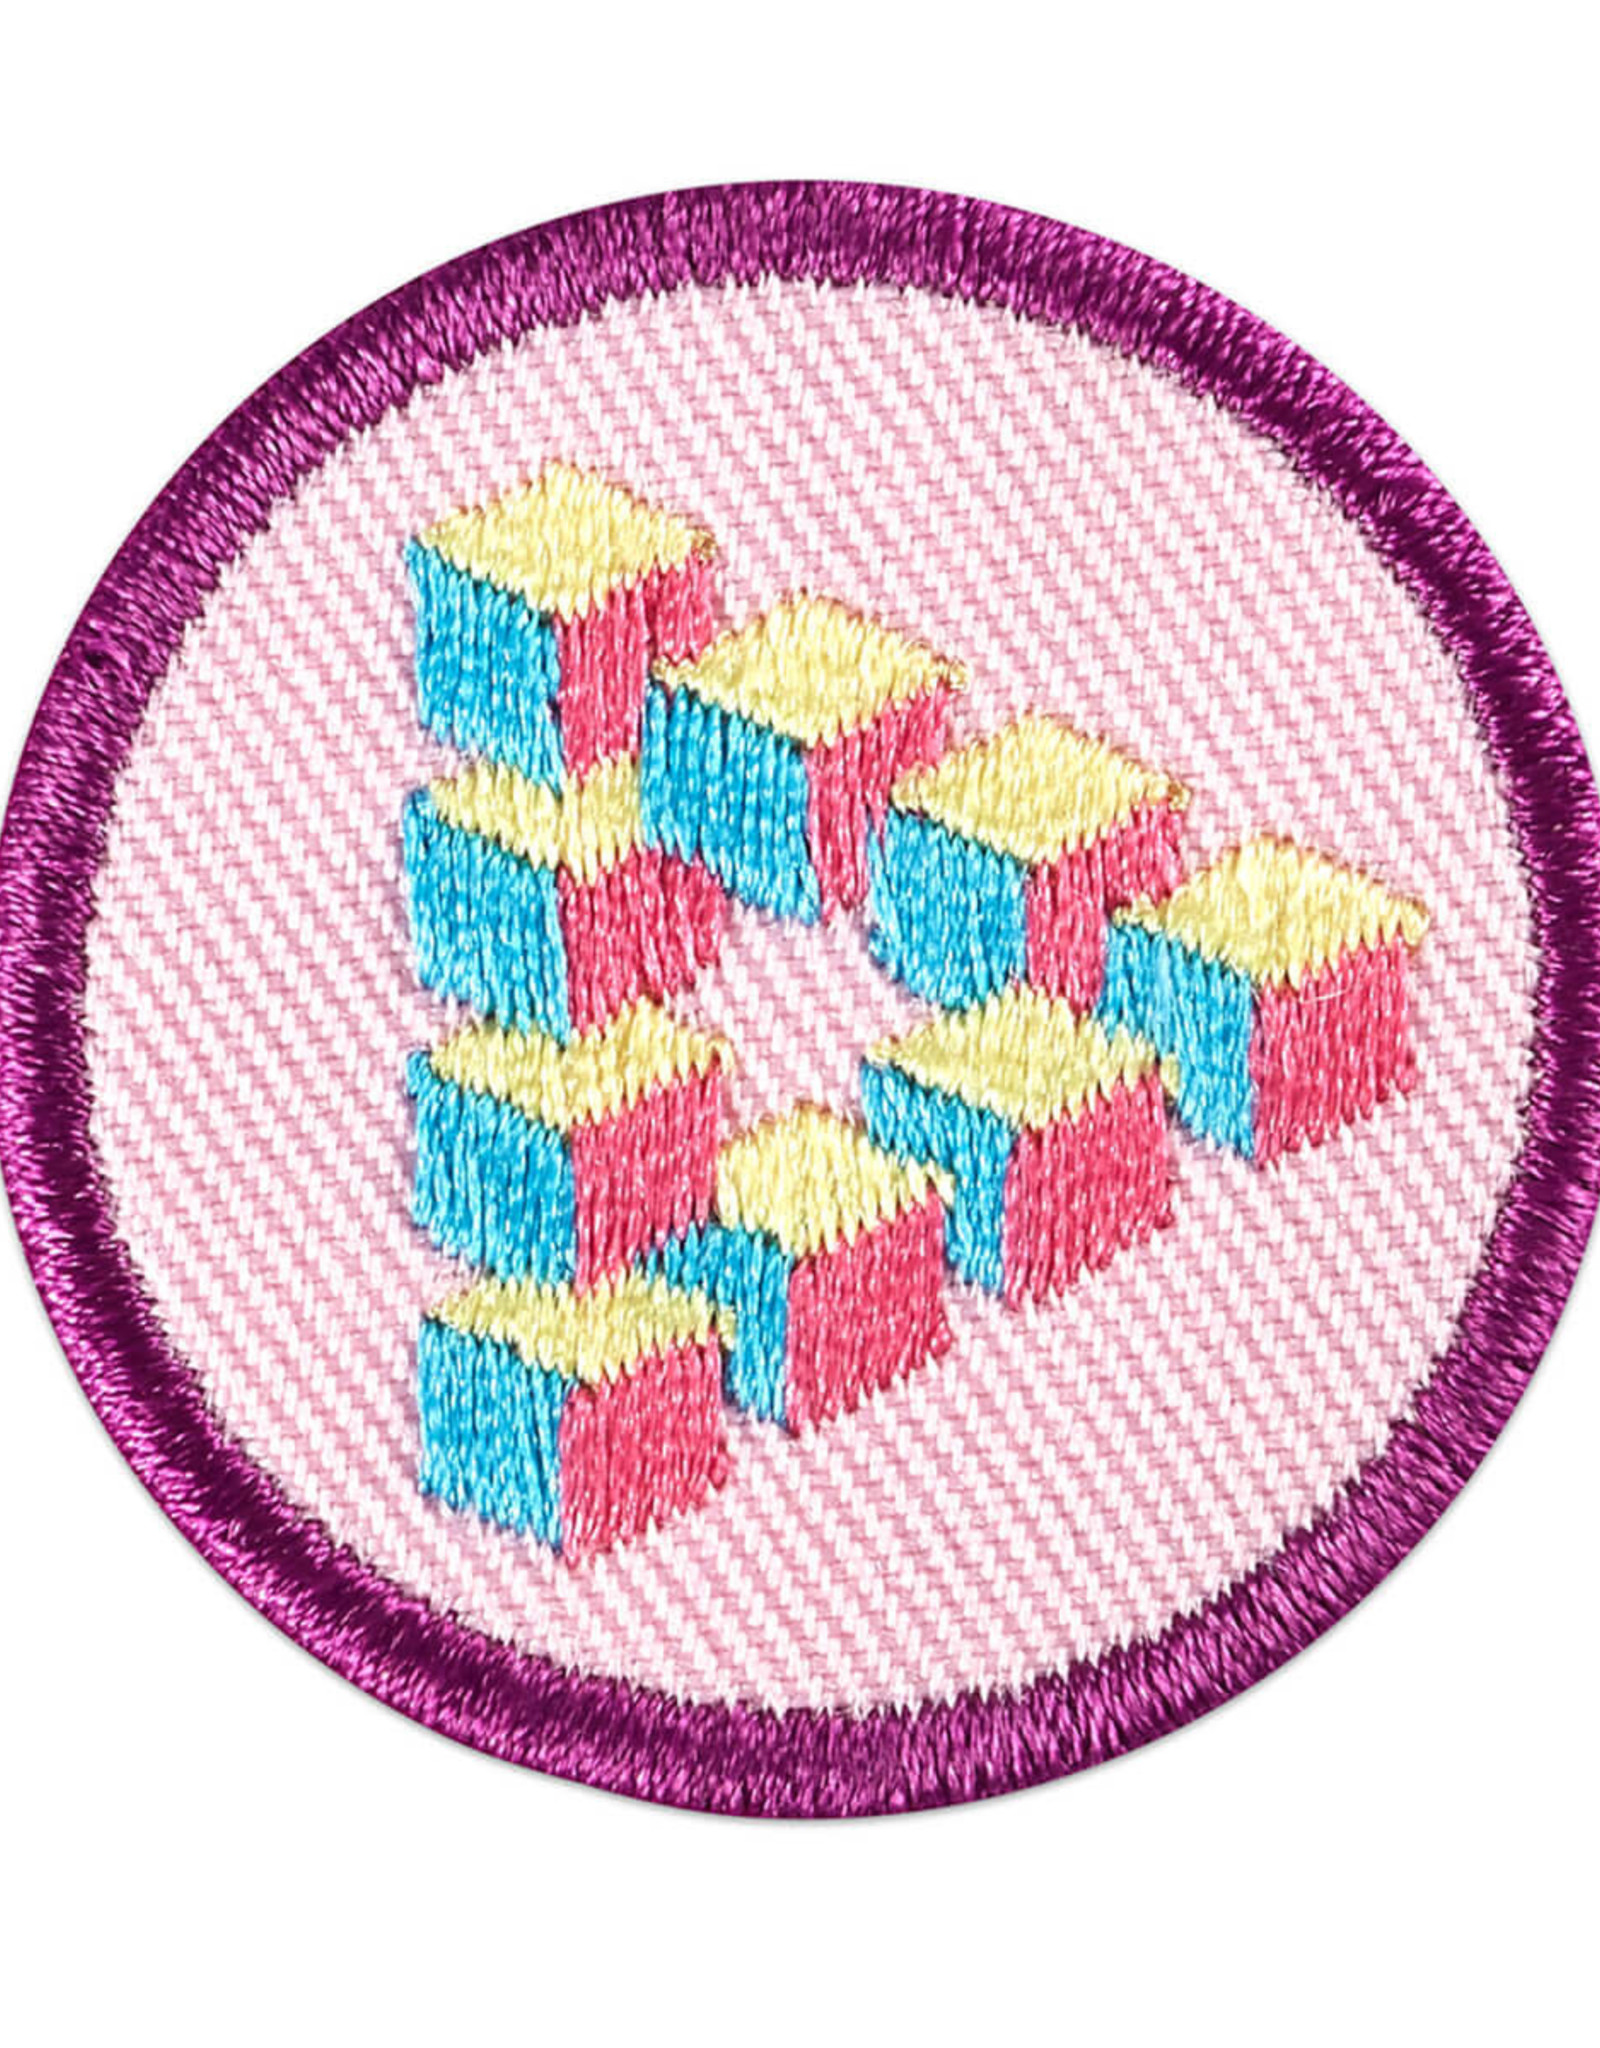 GIRL SCOUTS OF THE USA Junior Coding for Good 2: Digital Game Design Badge